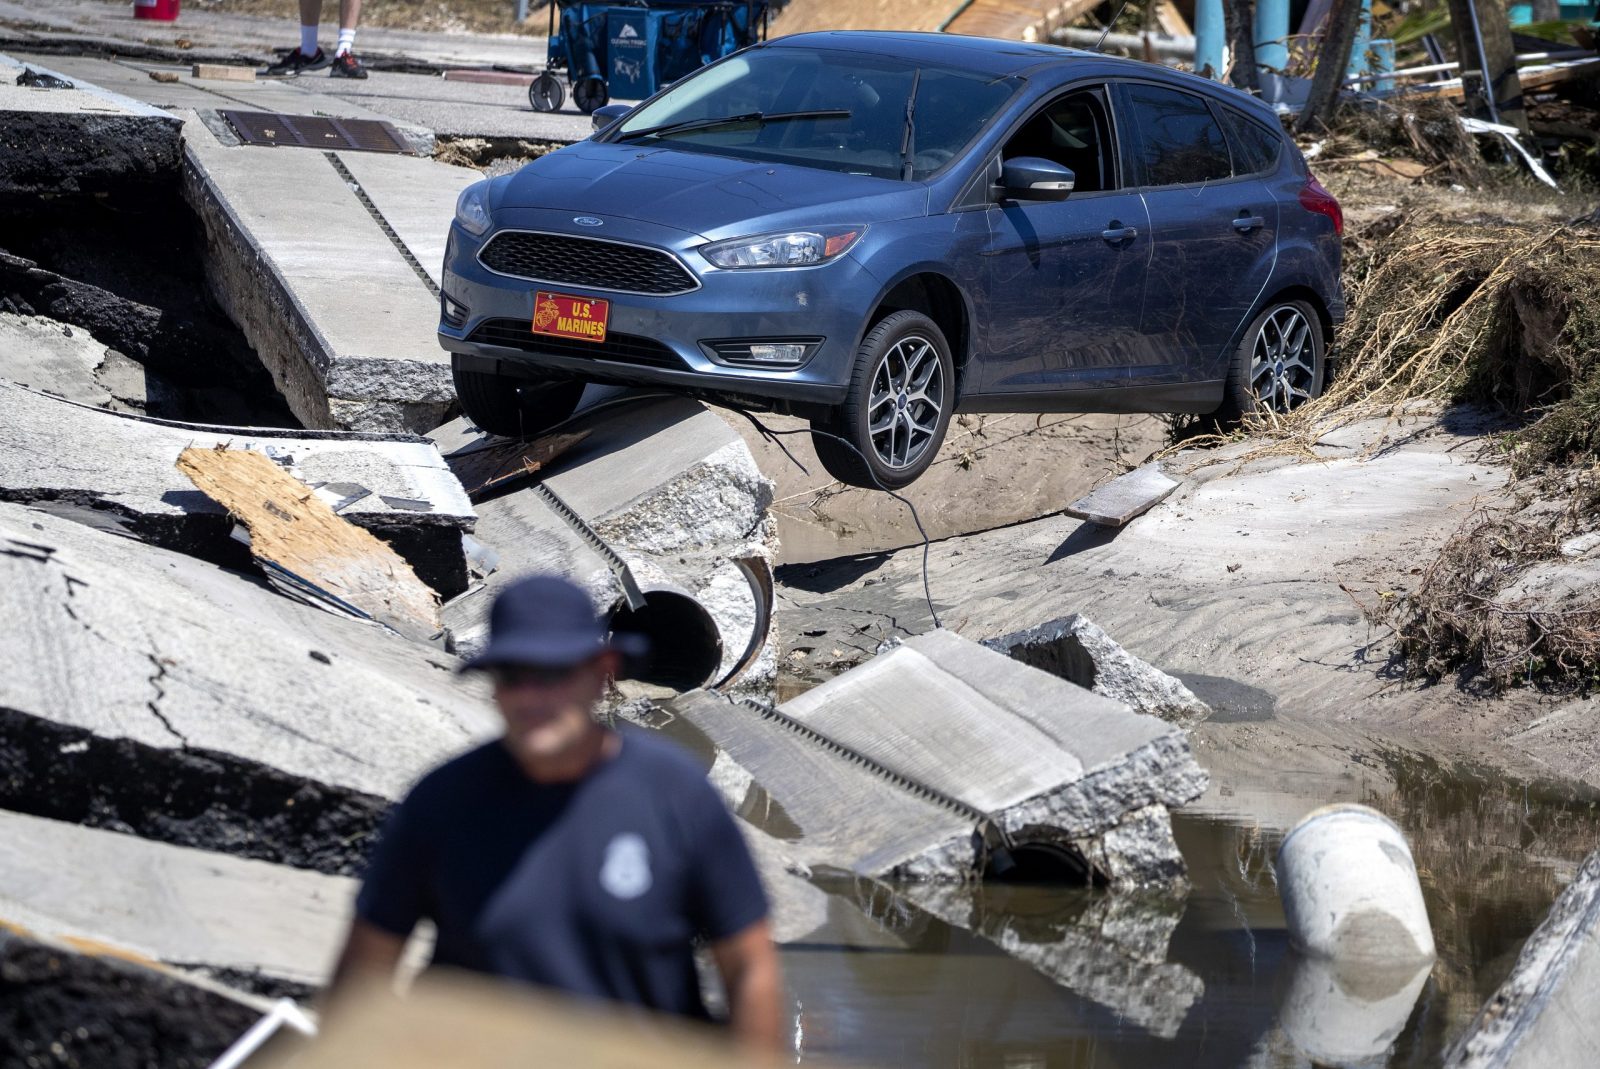 epa10216717 A car is perched on broken concrete in Matlacha Isles after the passing of Hurricane Ian, in Fort Myers Beach, Florida, USA, 30 September 2022. The category 4 hurricane made landfall on 28 September causing widespread damage and power outages.  EPA/CRISTOBAL HERRERA-ULASHKEVICH